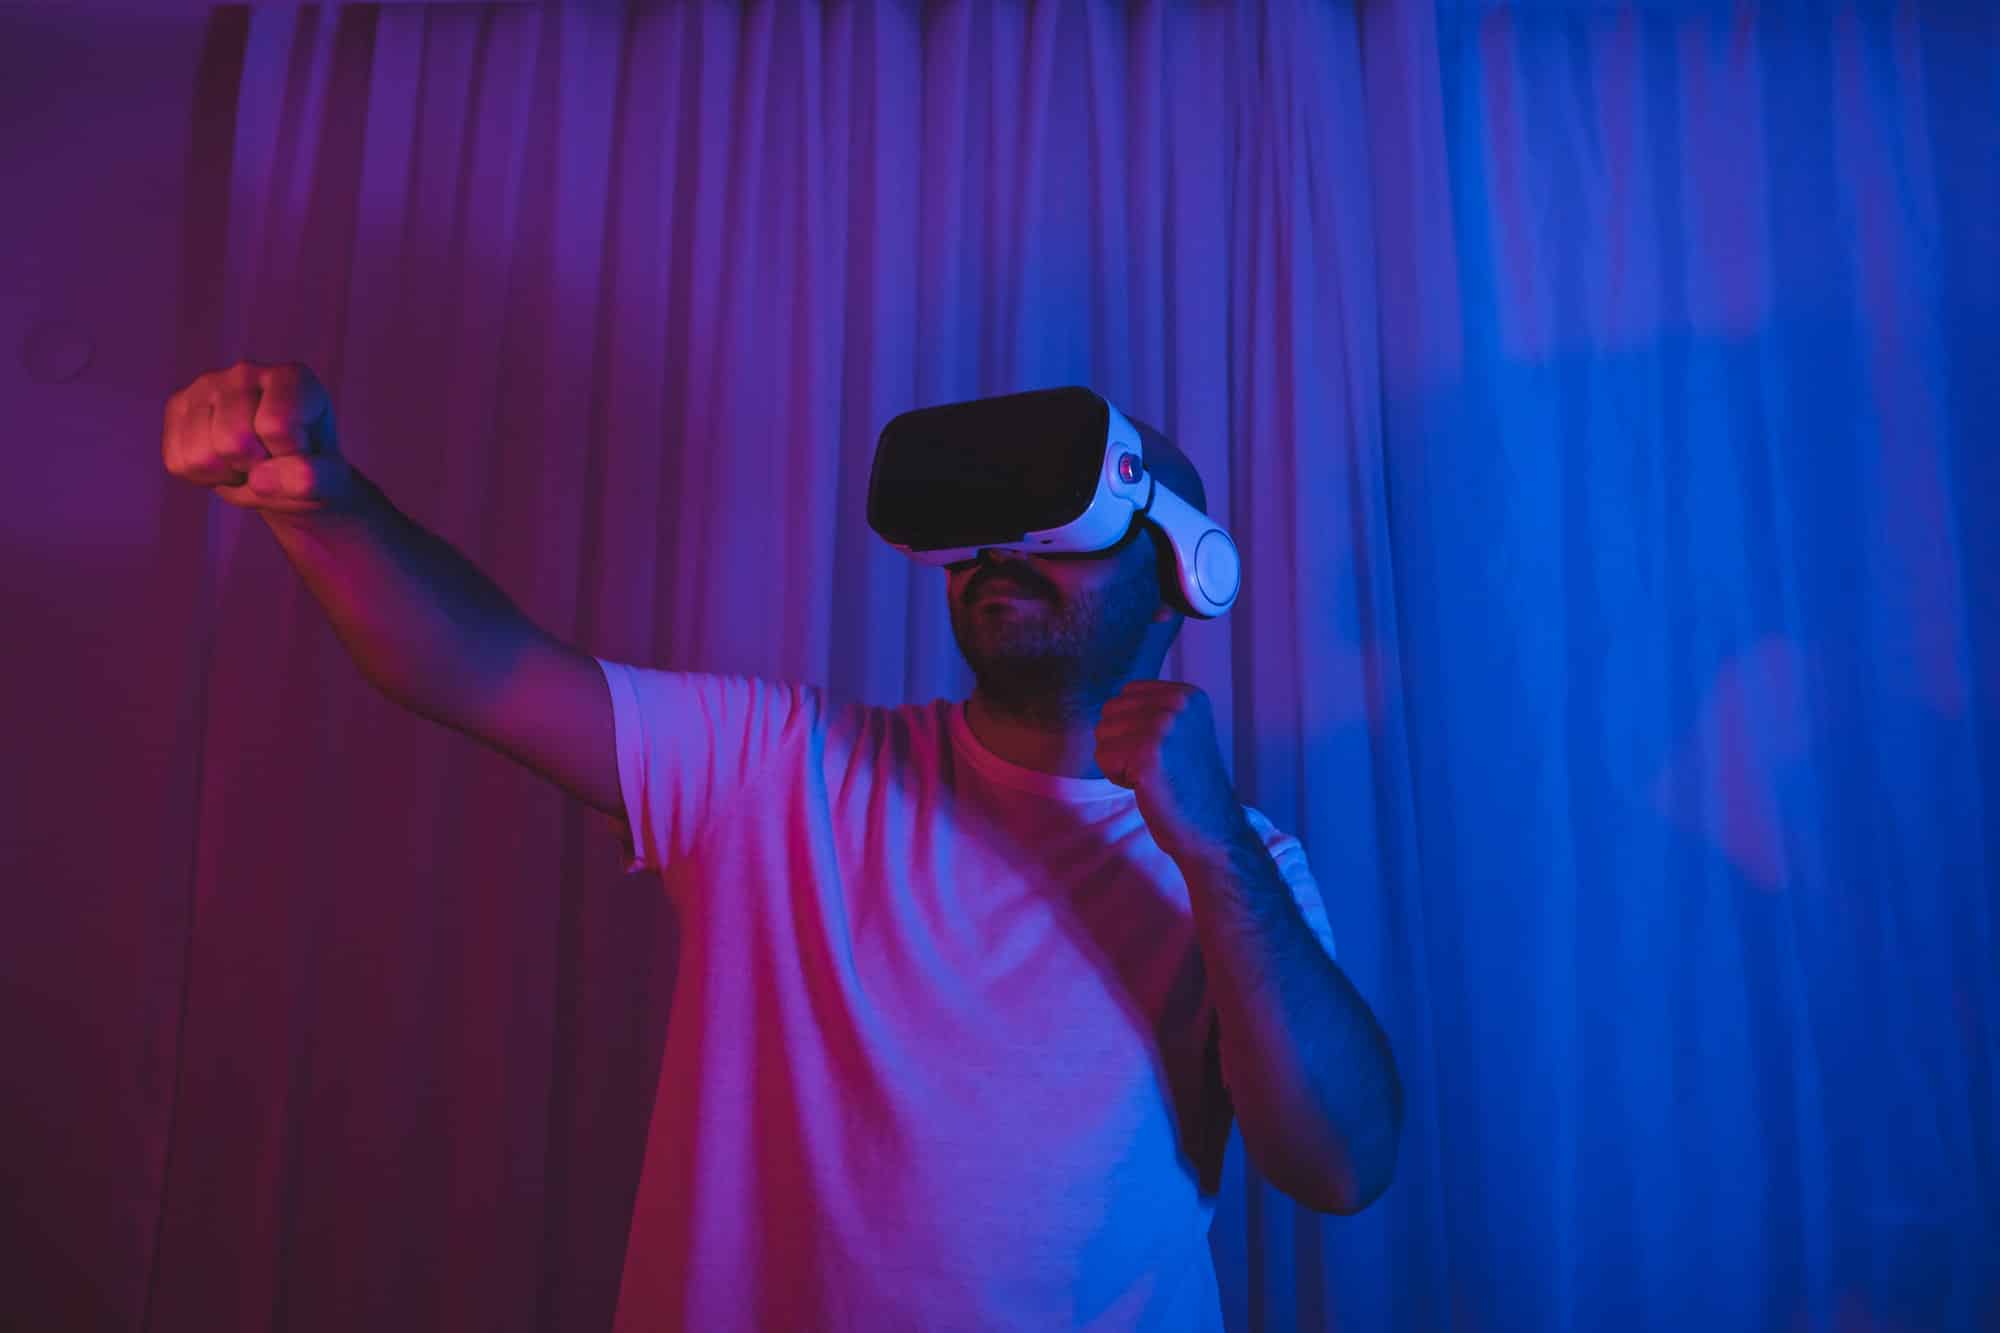 The man who entered the world of the metaverse with VR glasses is playing a boxing match.